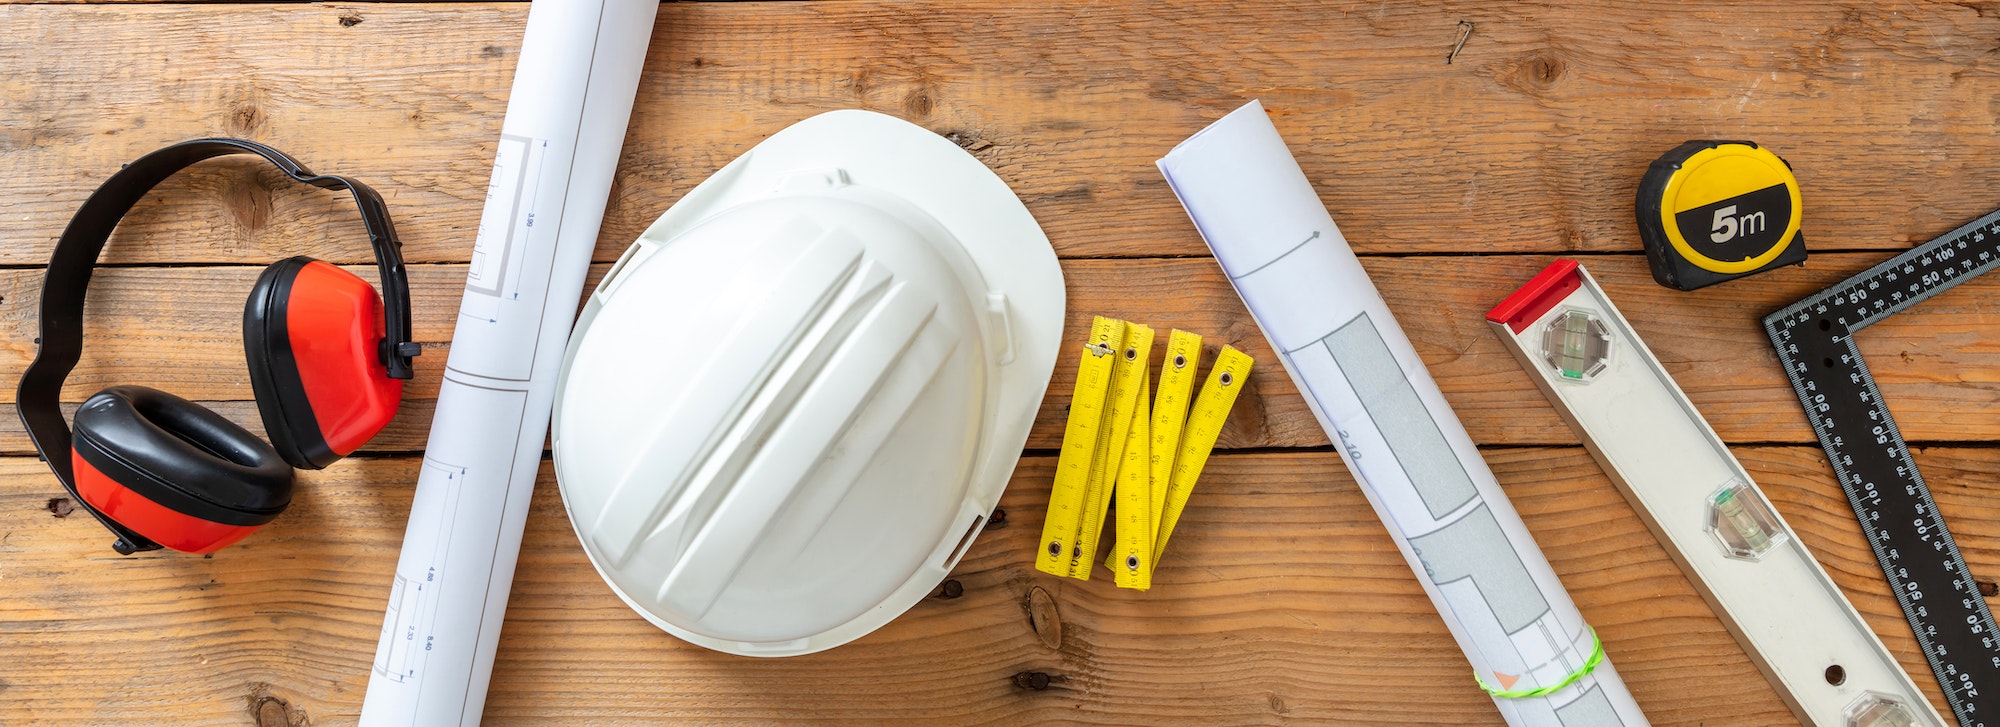 Choosing The Right Equipment For Your Construction Project: A Guide